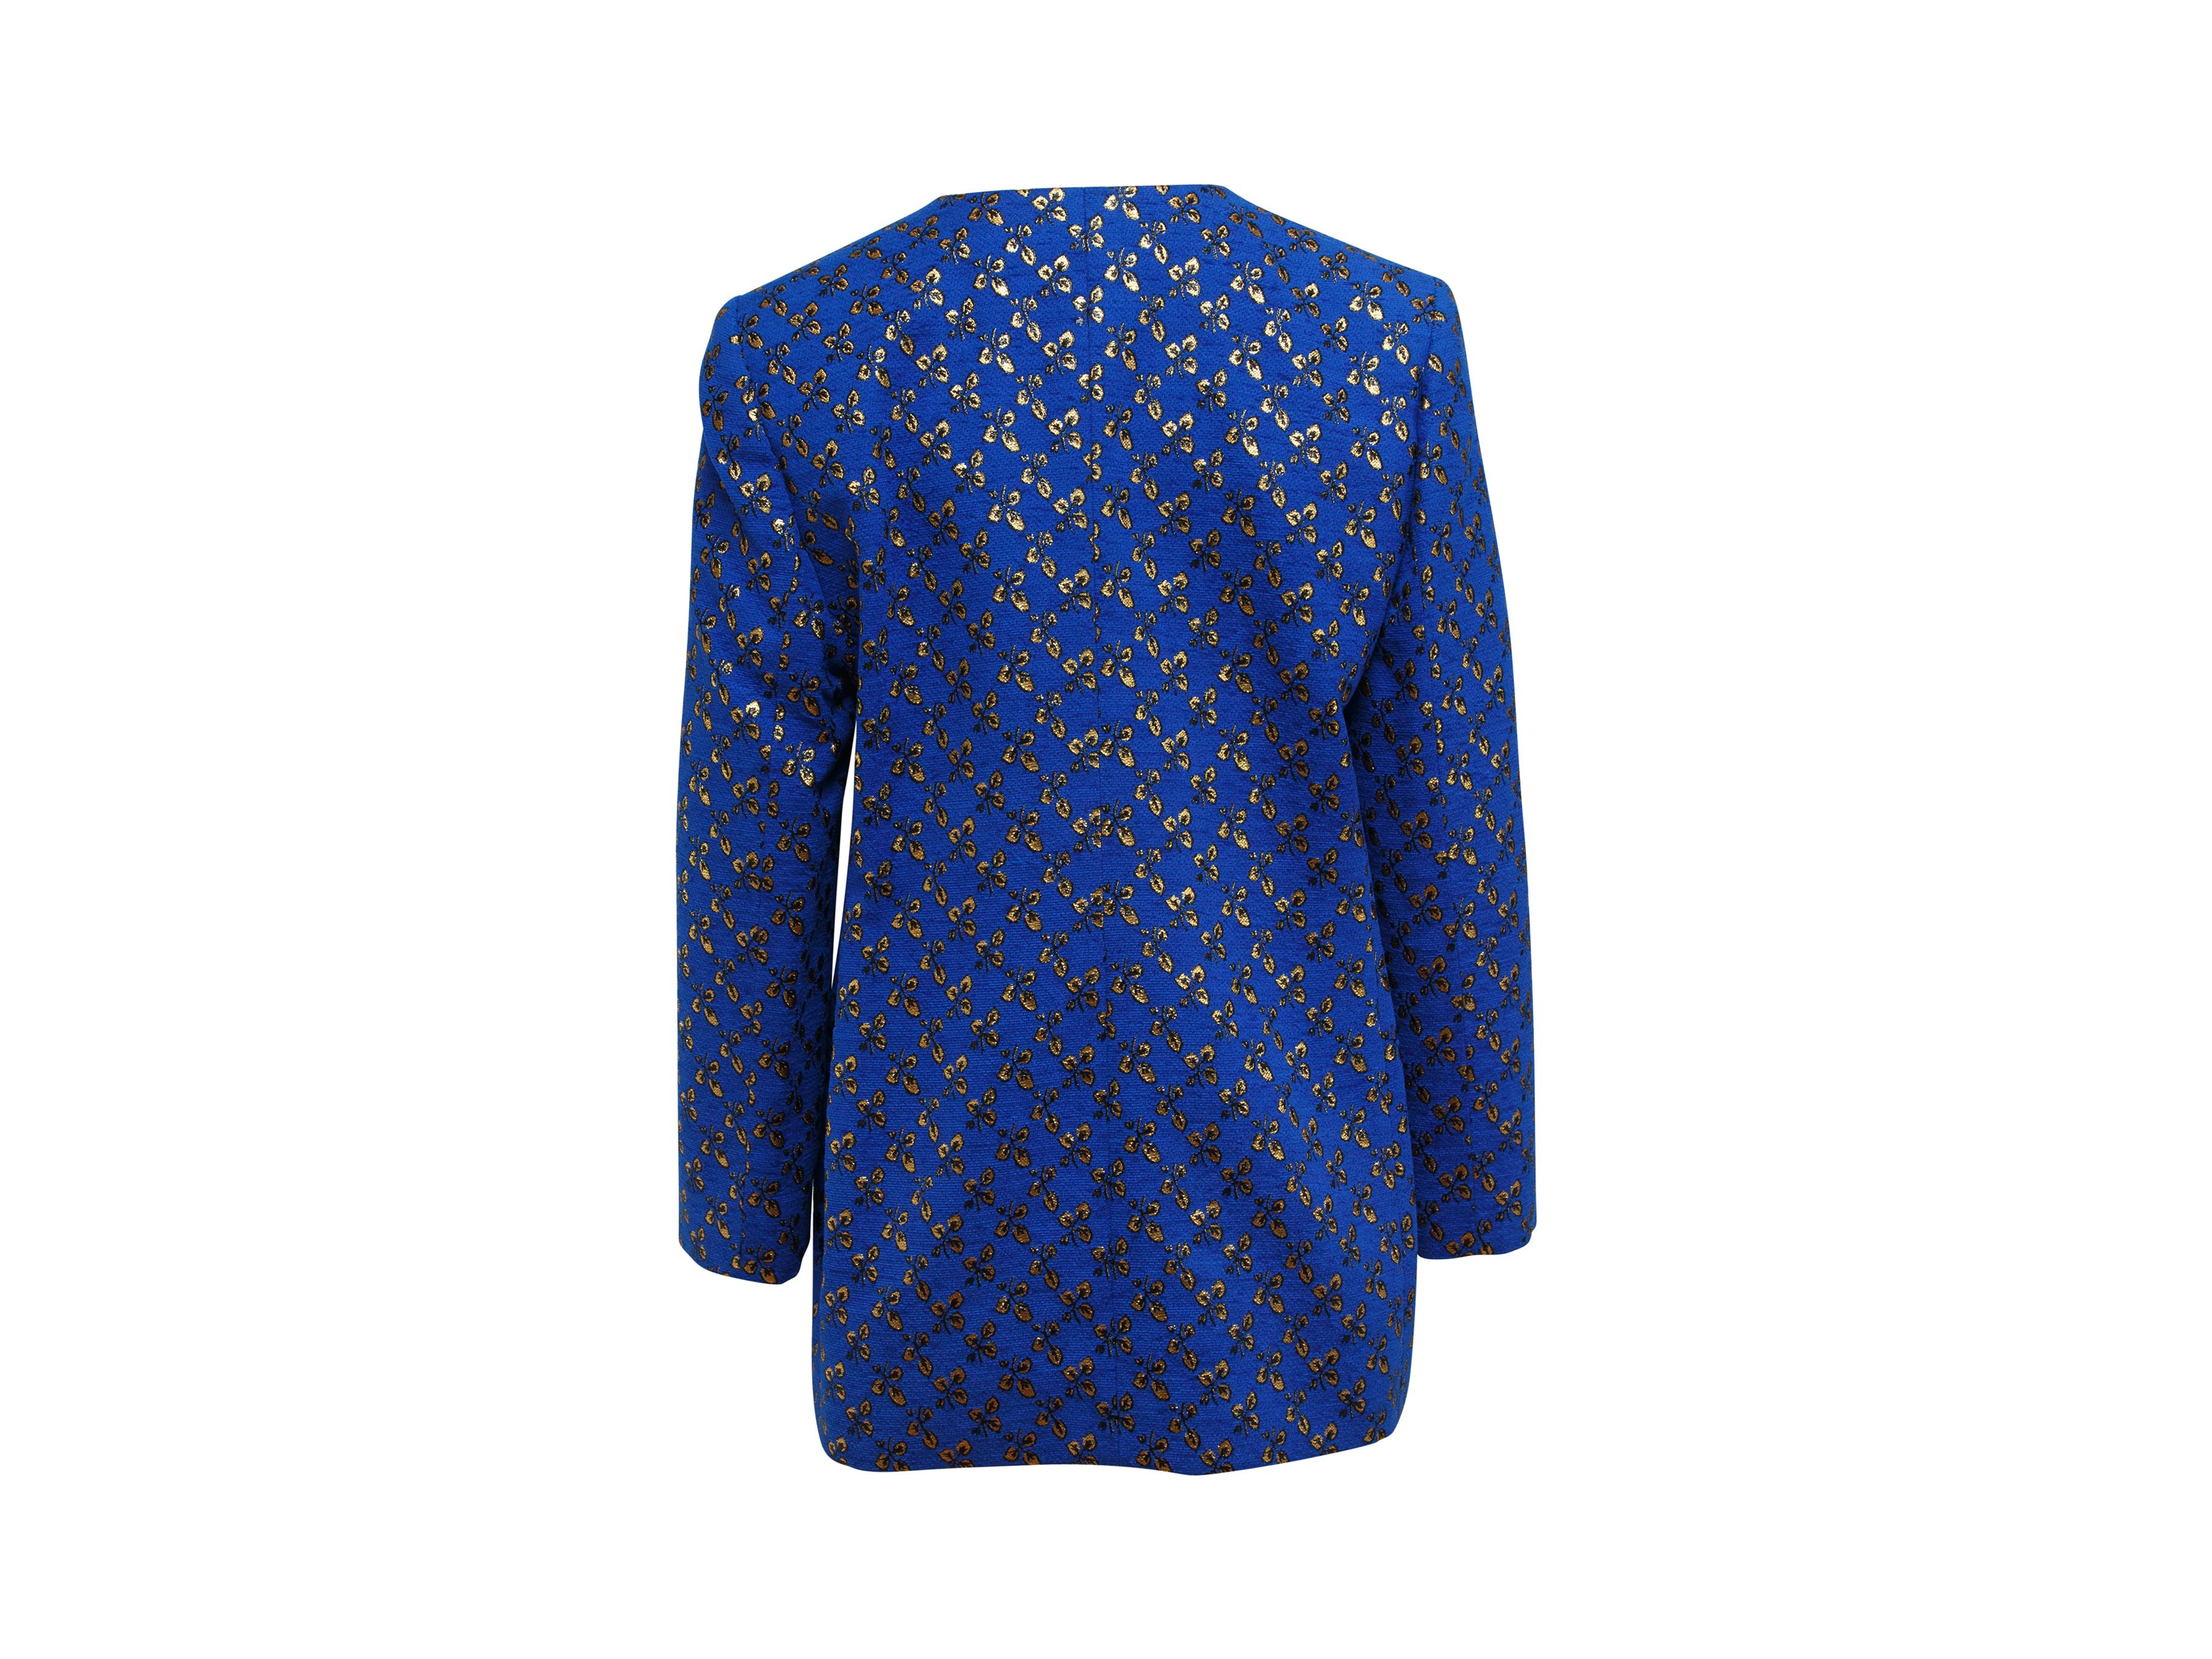 Product details:  Vintage metallic gold and blue leaf-printed jacket by Givenchy Couture.  V-neck.  Long sleeves.  Button-front closure.  Goldtone hardware.  40